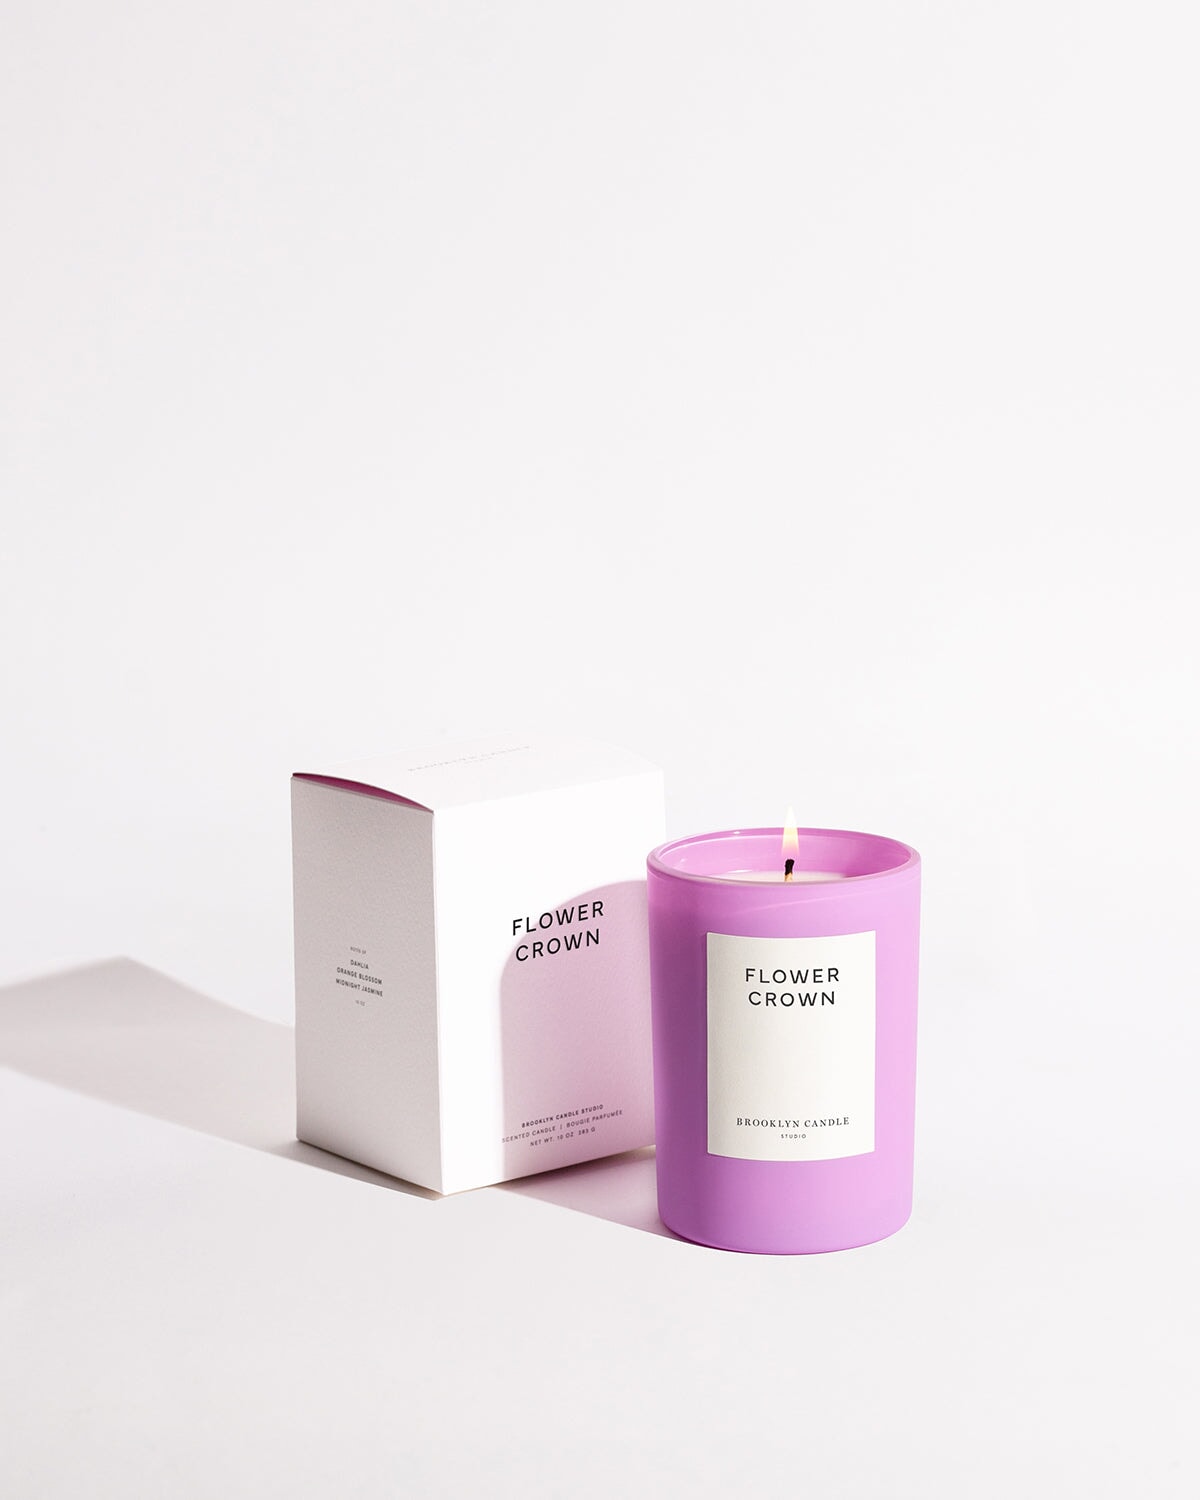 Flower Crown Spring Edition Candle Lilac Haze Collection Brooklyn Candle Studio 